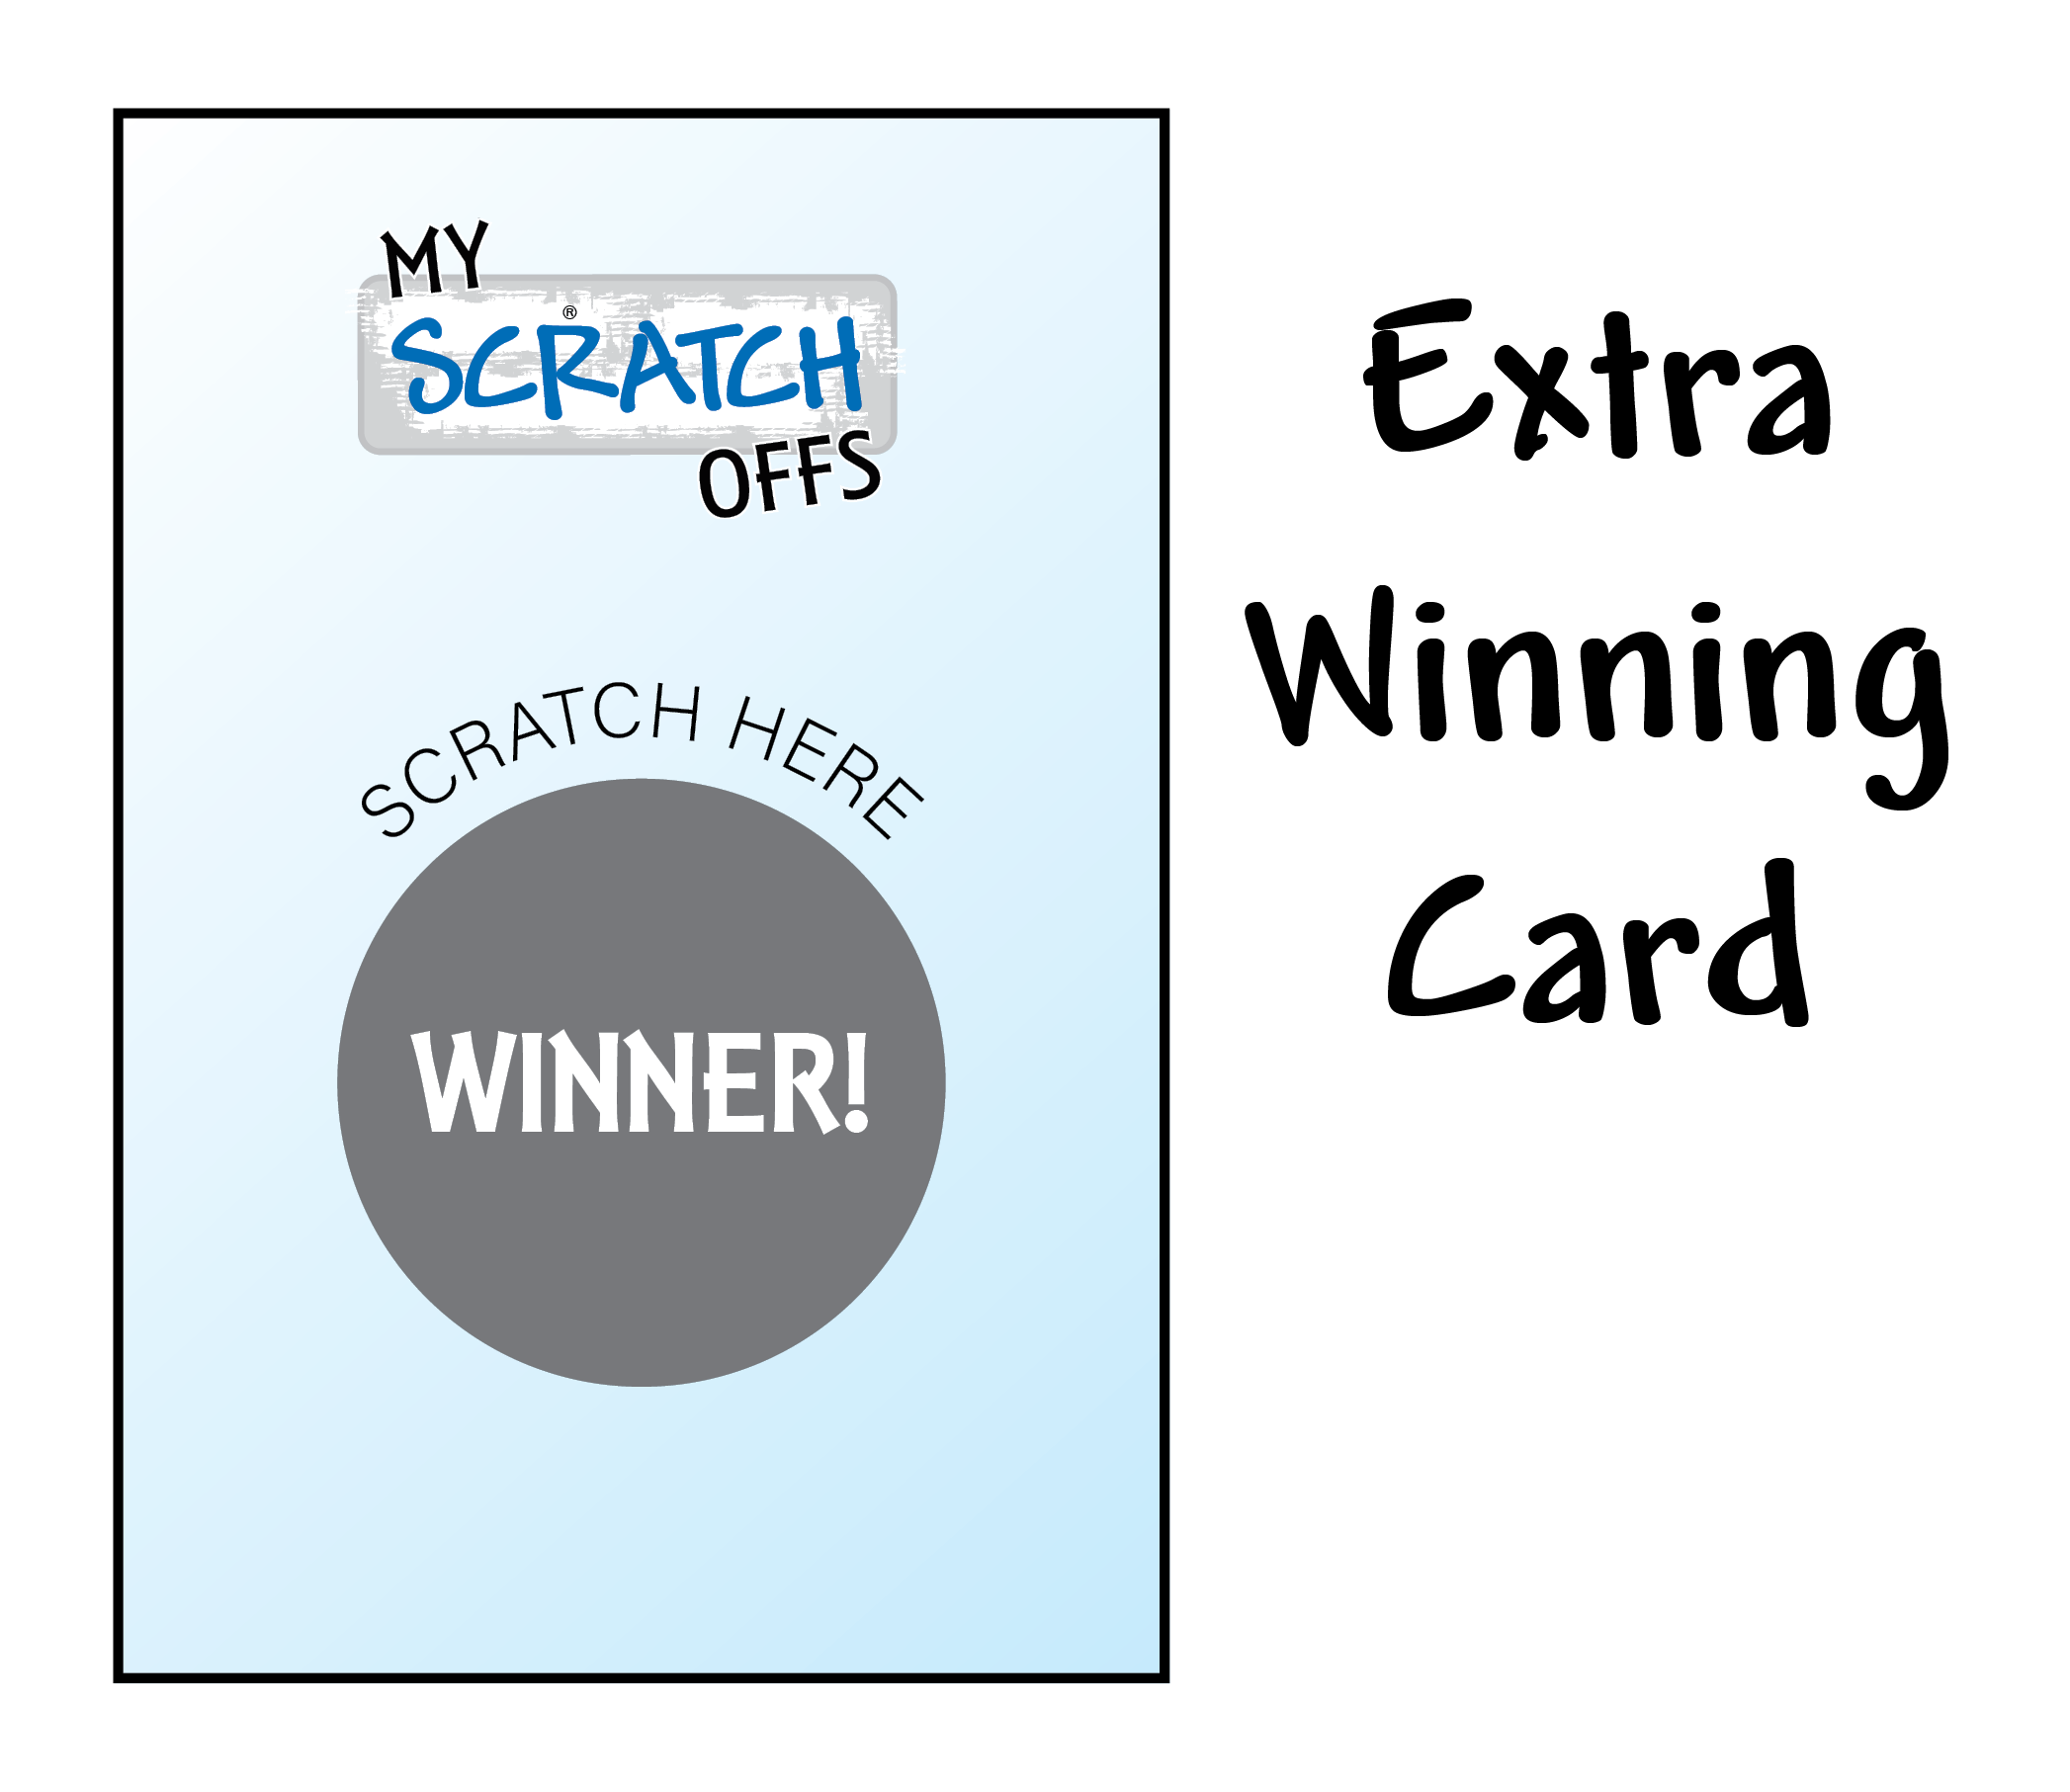 Extra Winning Card - 4th of July and Summer - My Scratch Offs